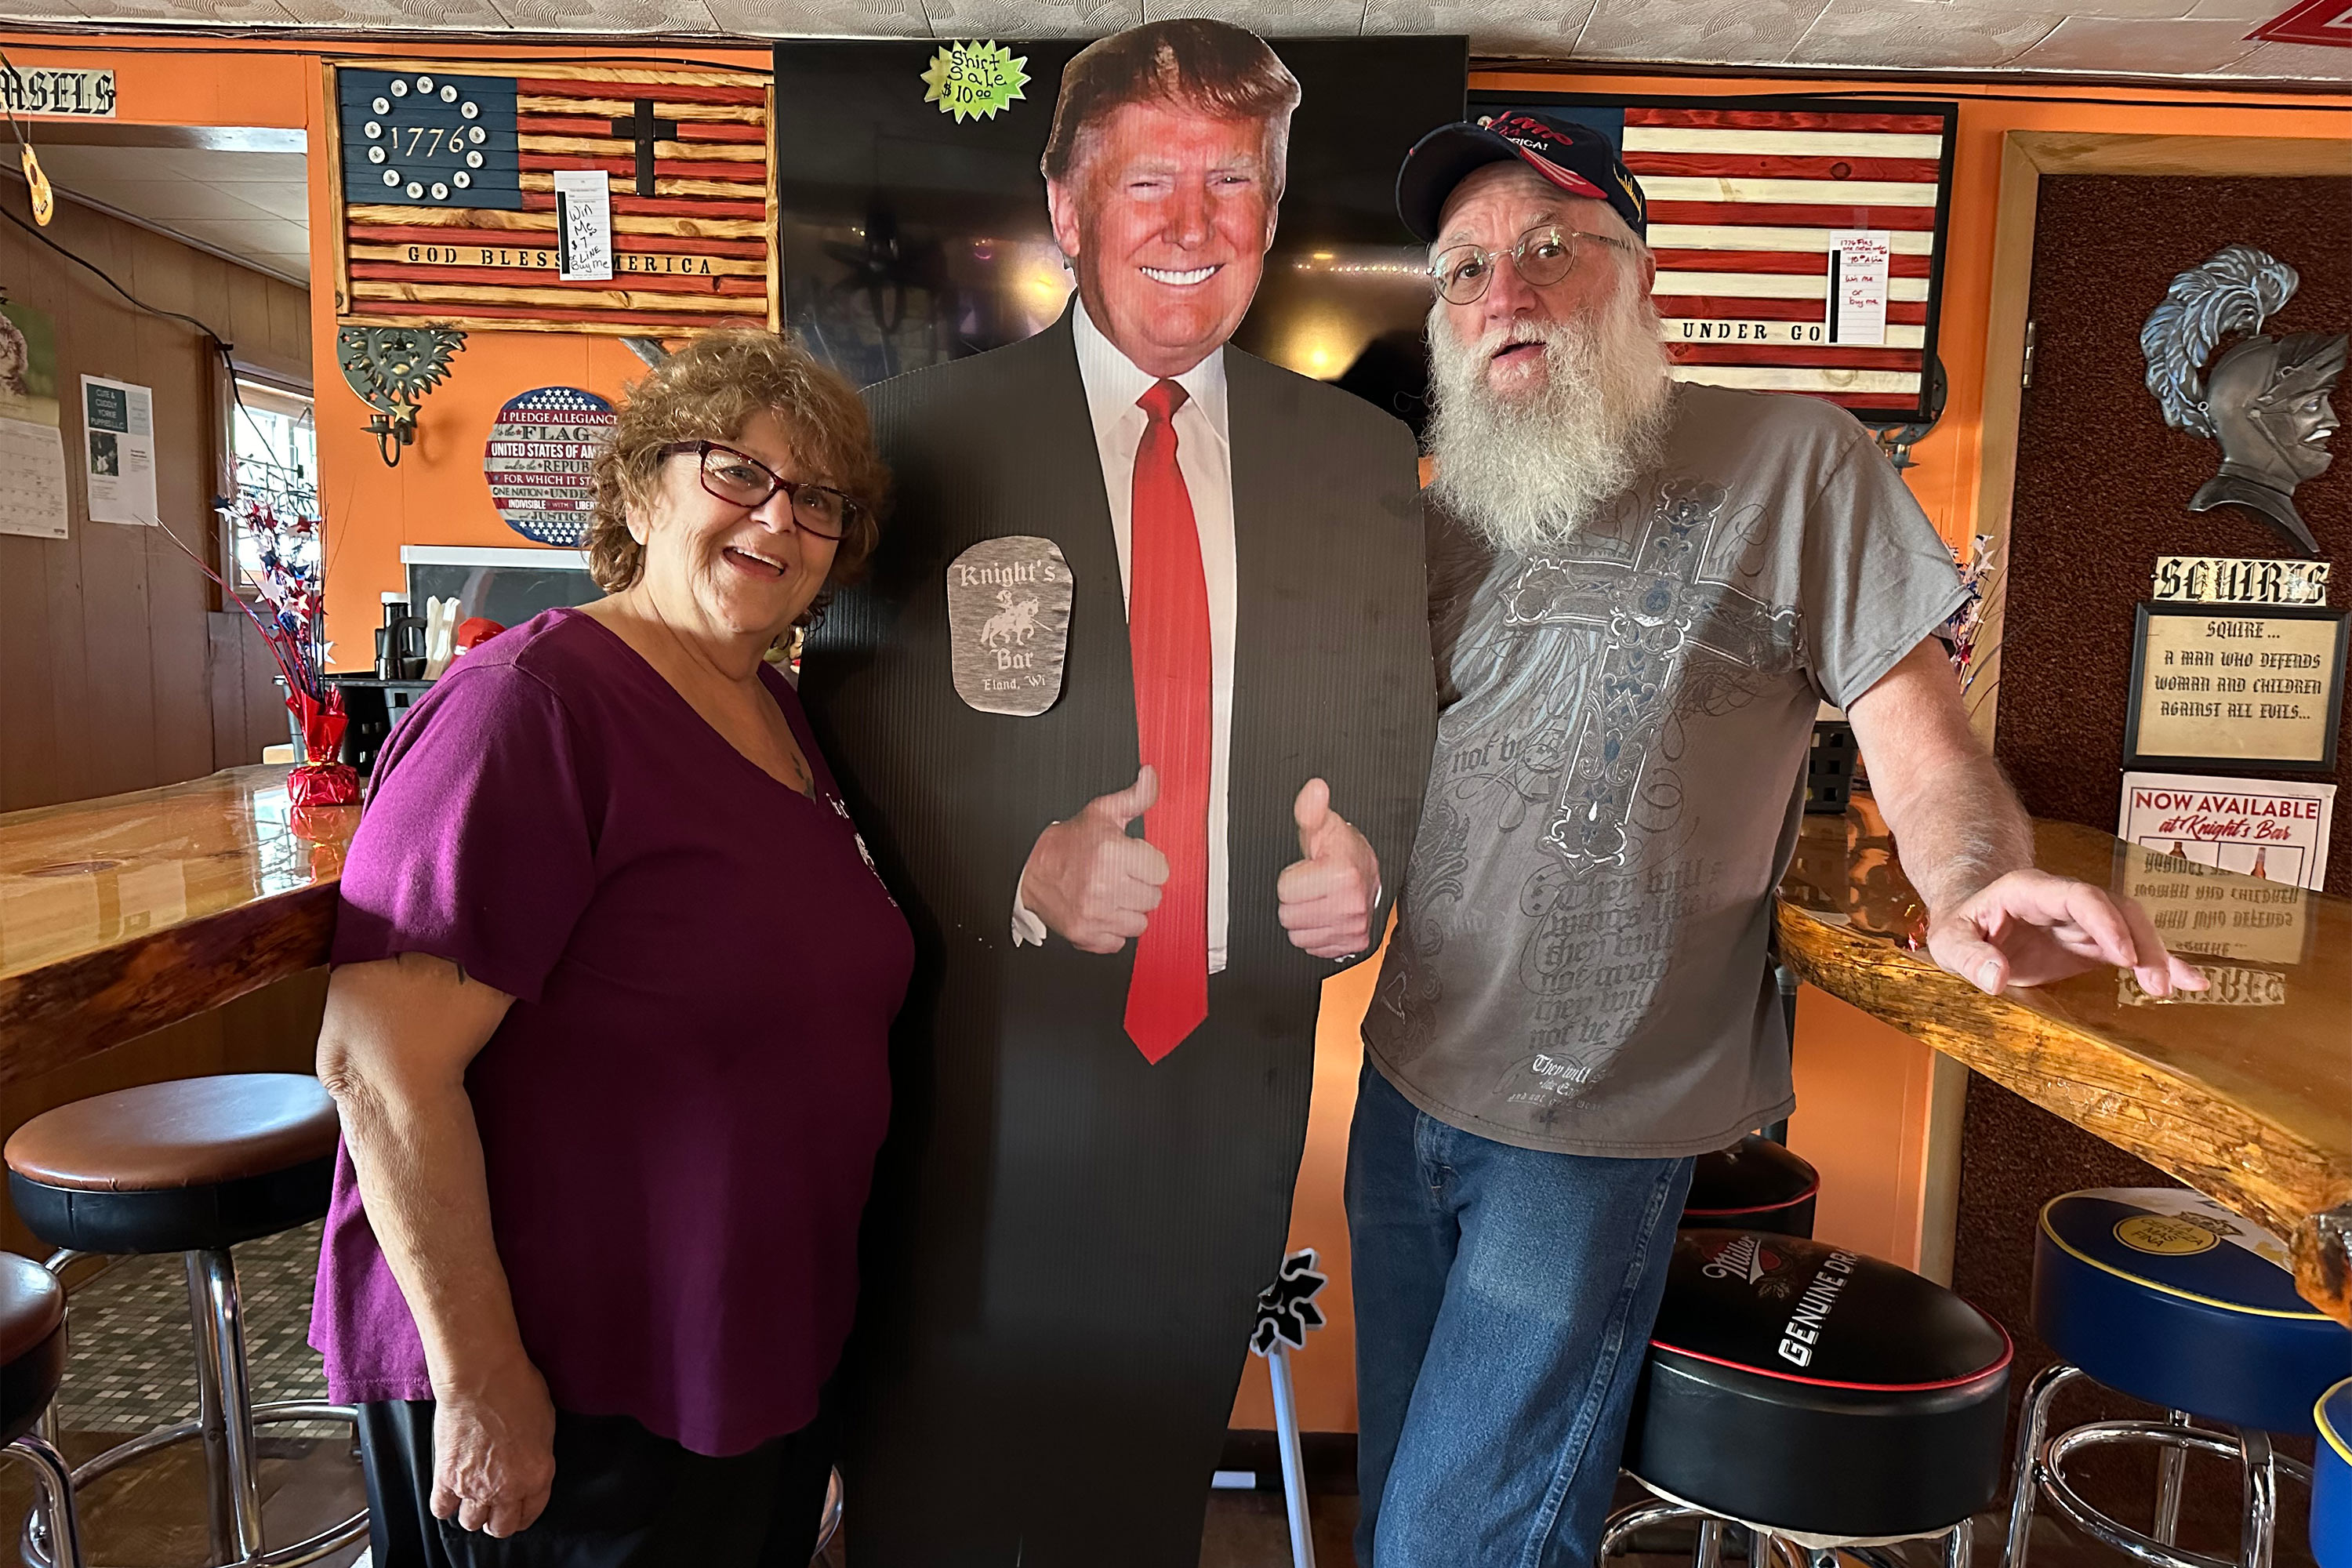 A photo of a couple posing for a couple with a life-sized cutout of former President Donald Trump indoors.